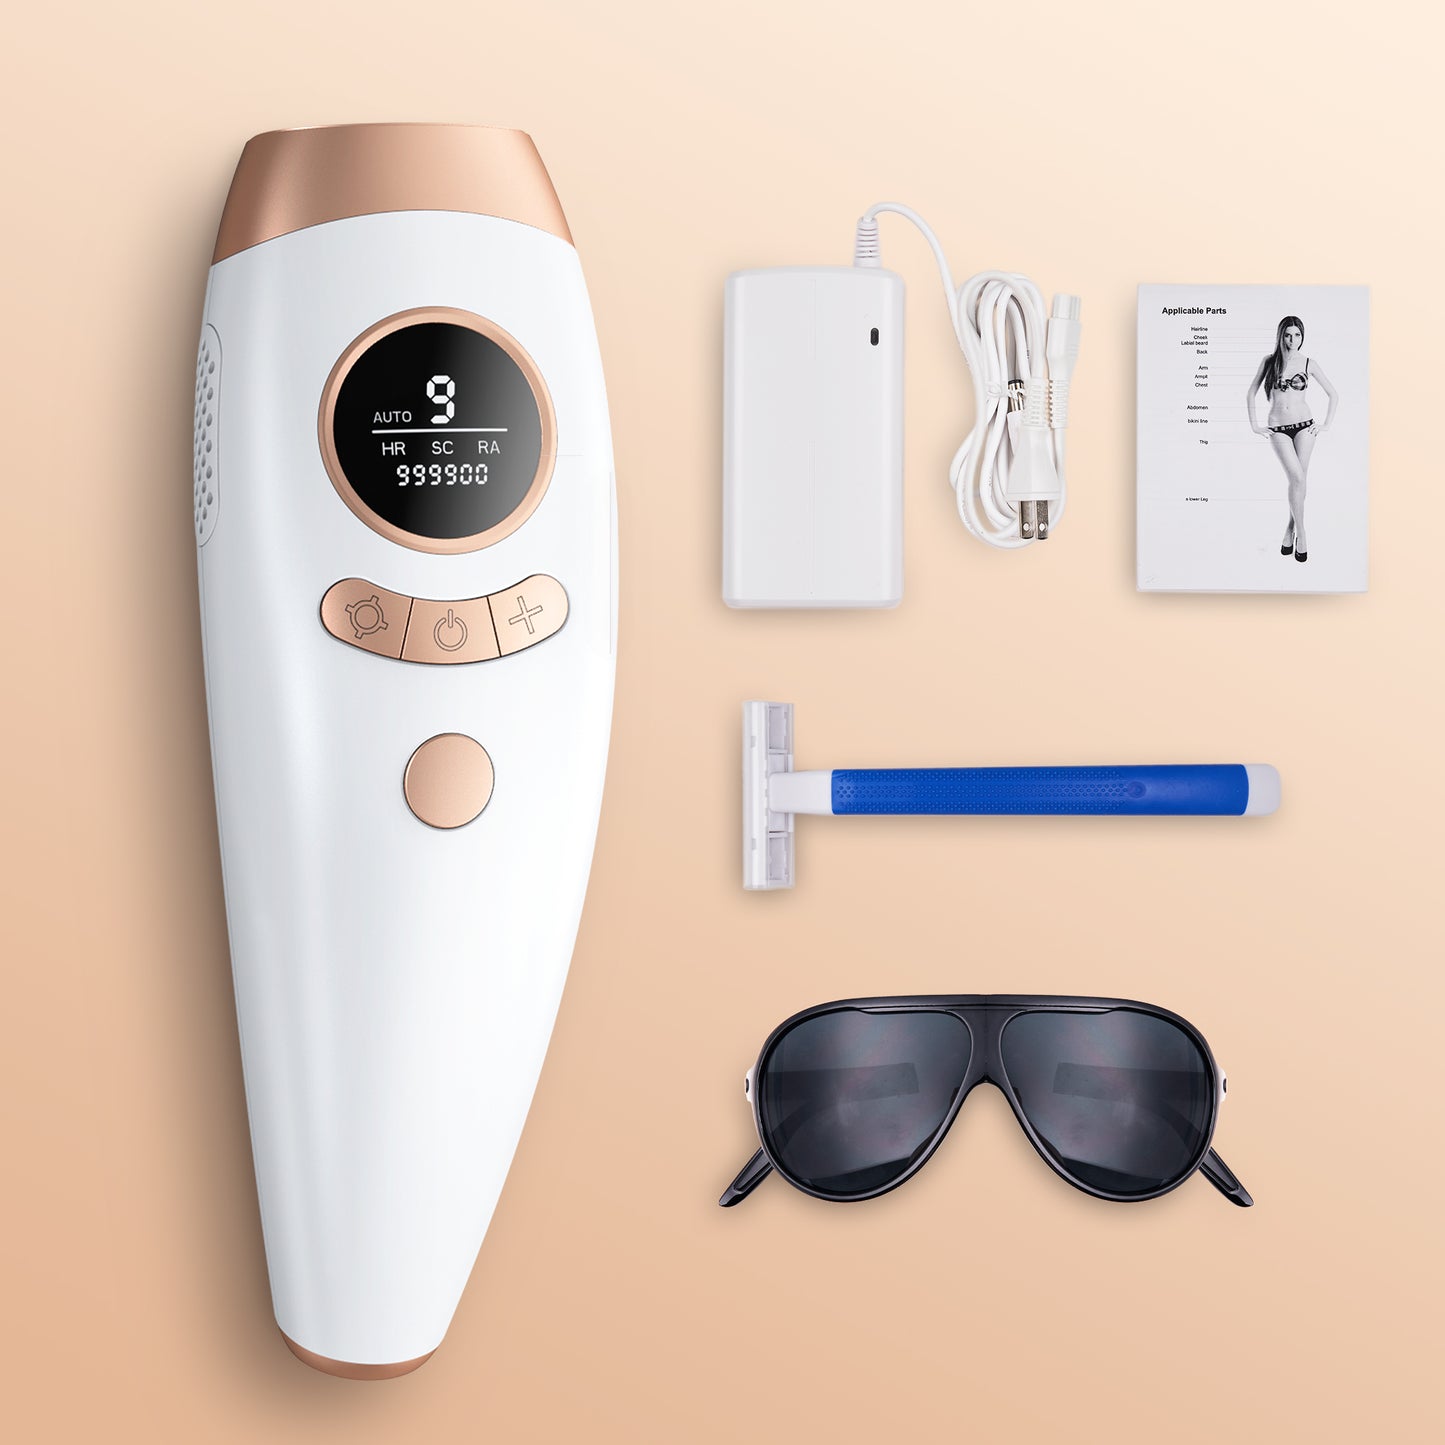 Say Goodbye to Razors and Waxing with Our Innovative IPL Laser Epilator